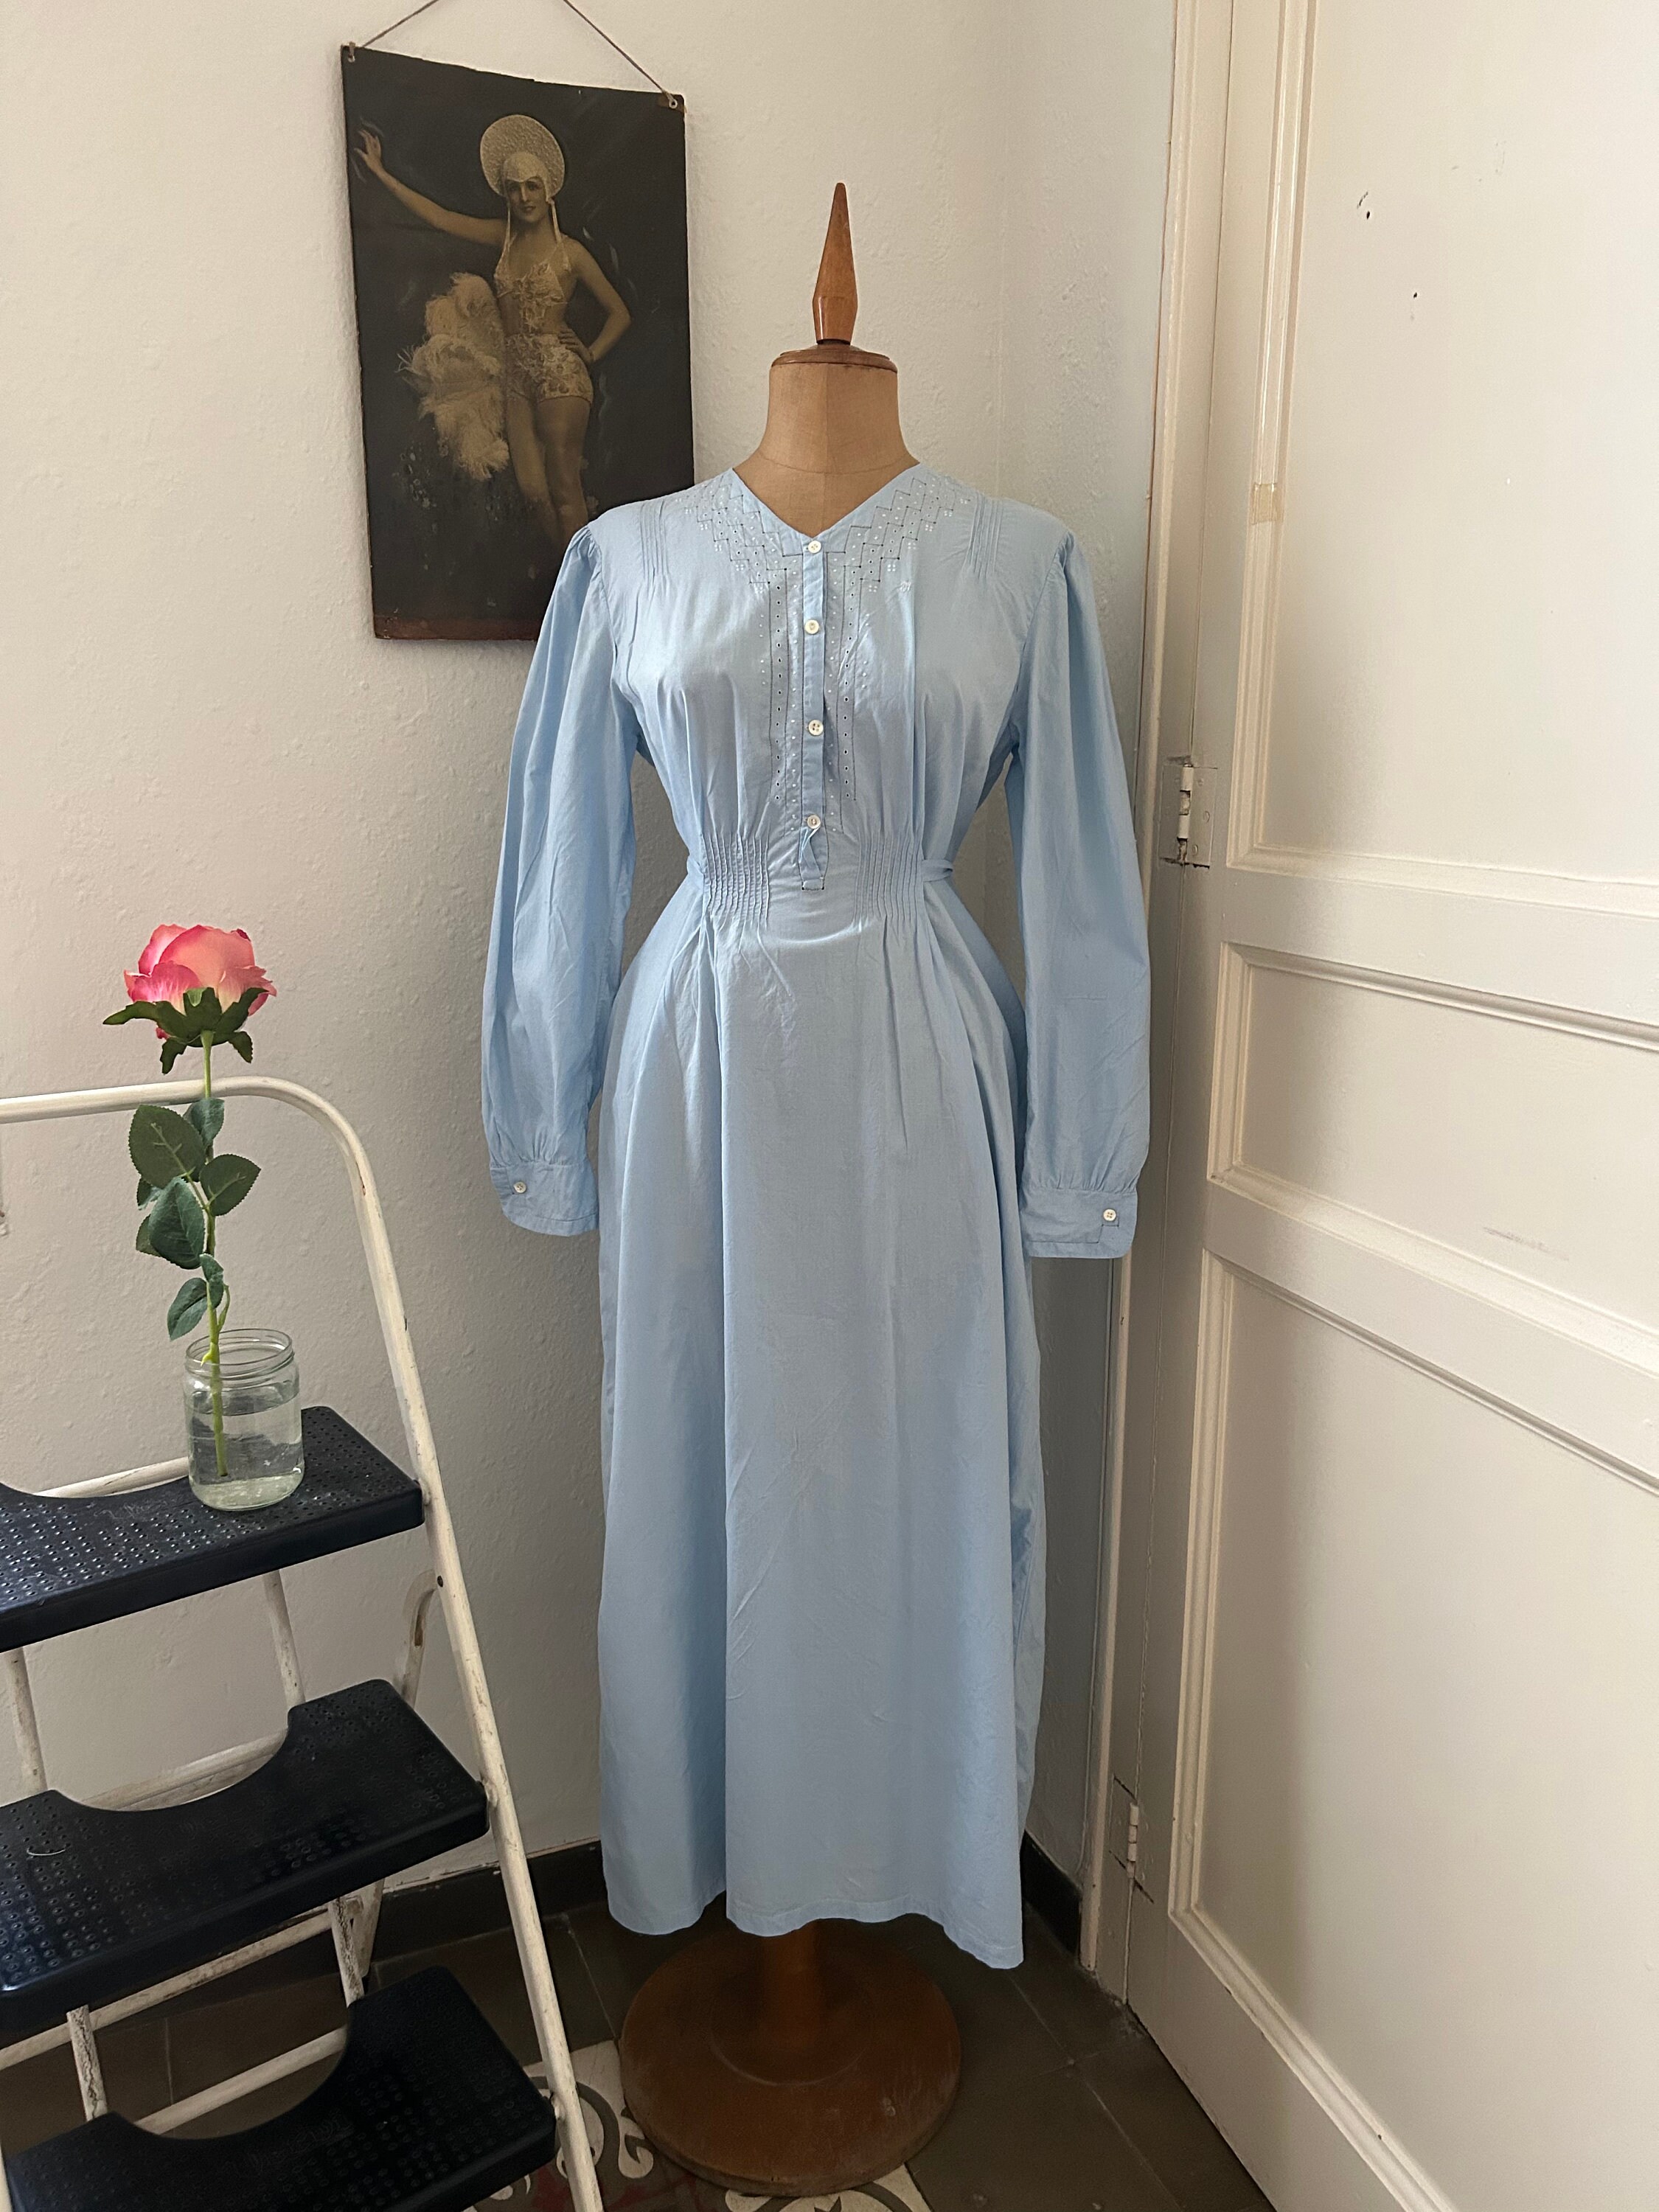 Vintage 1940s Blue Cotton Long Sleeved Nightgown W/ White Dotted Embroidery  Work, Homemade Vintage Baby Blue Nightdress W/ Sash Size Medium 